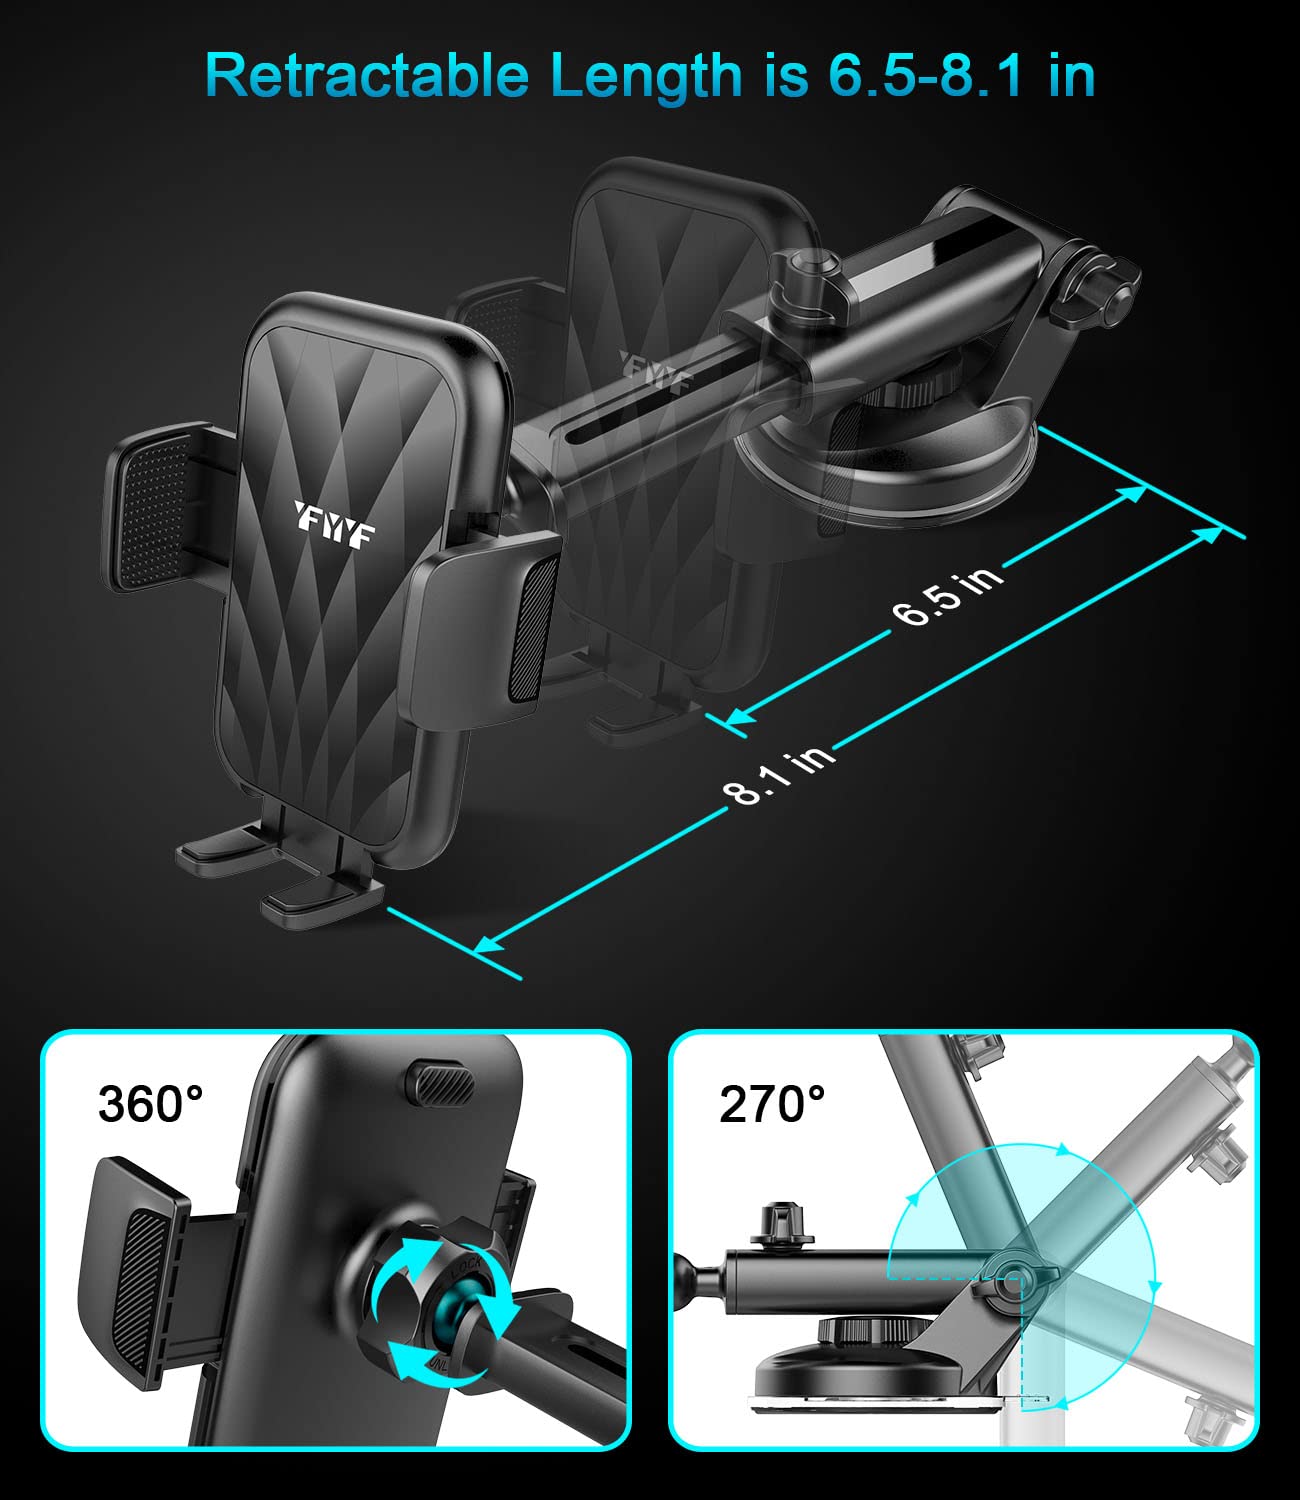 Phone Mount for Car,【Upgraded Stepless Adjustment Suction Cup】 Car Phone Holder Mount Dashboard Windshield Vent Universal Cell Phone Holder Mount for All Smartphones